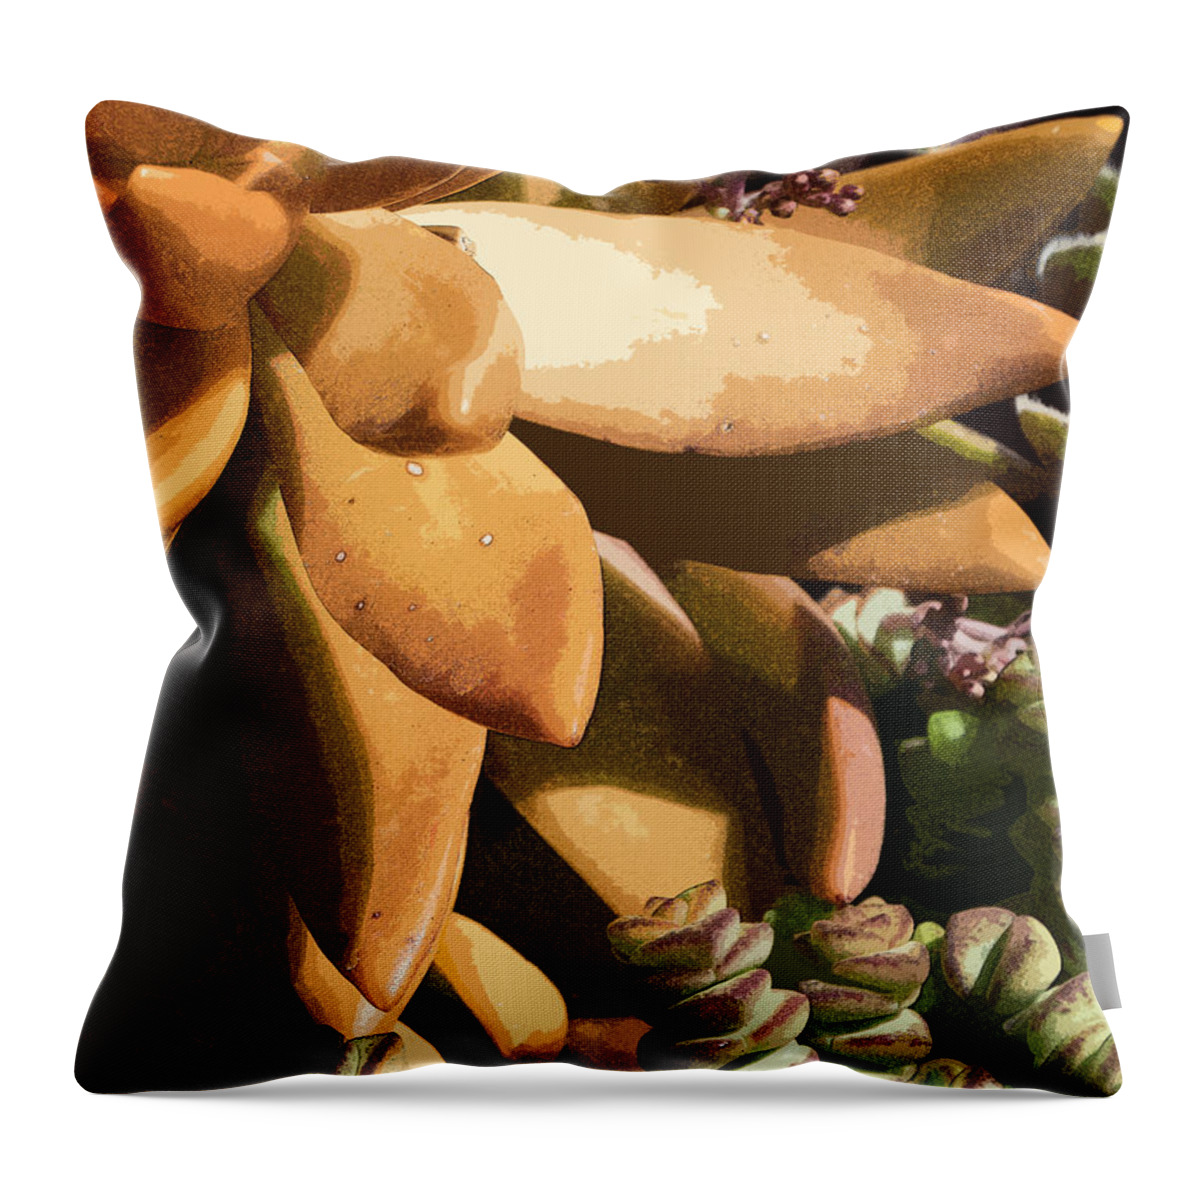 Succulant Throw Pillow featuring the photograph Exotica 7 by Jessica Levant